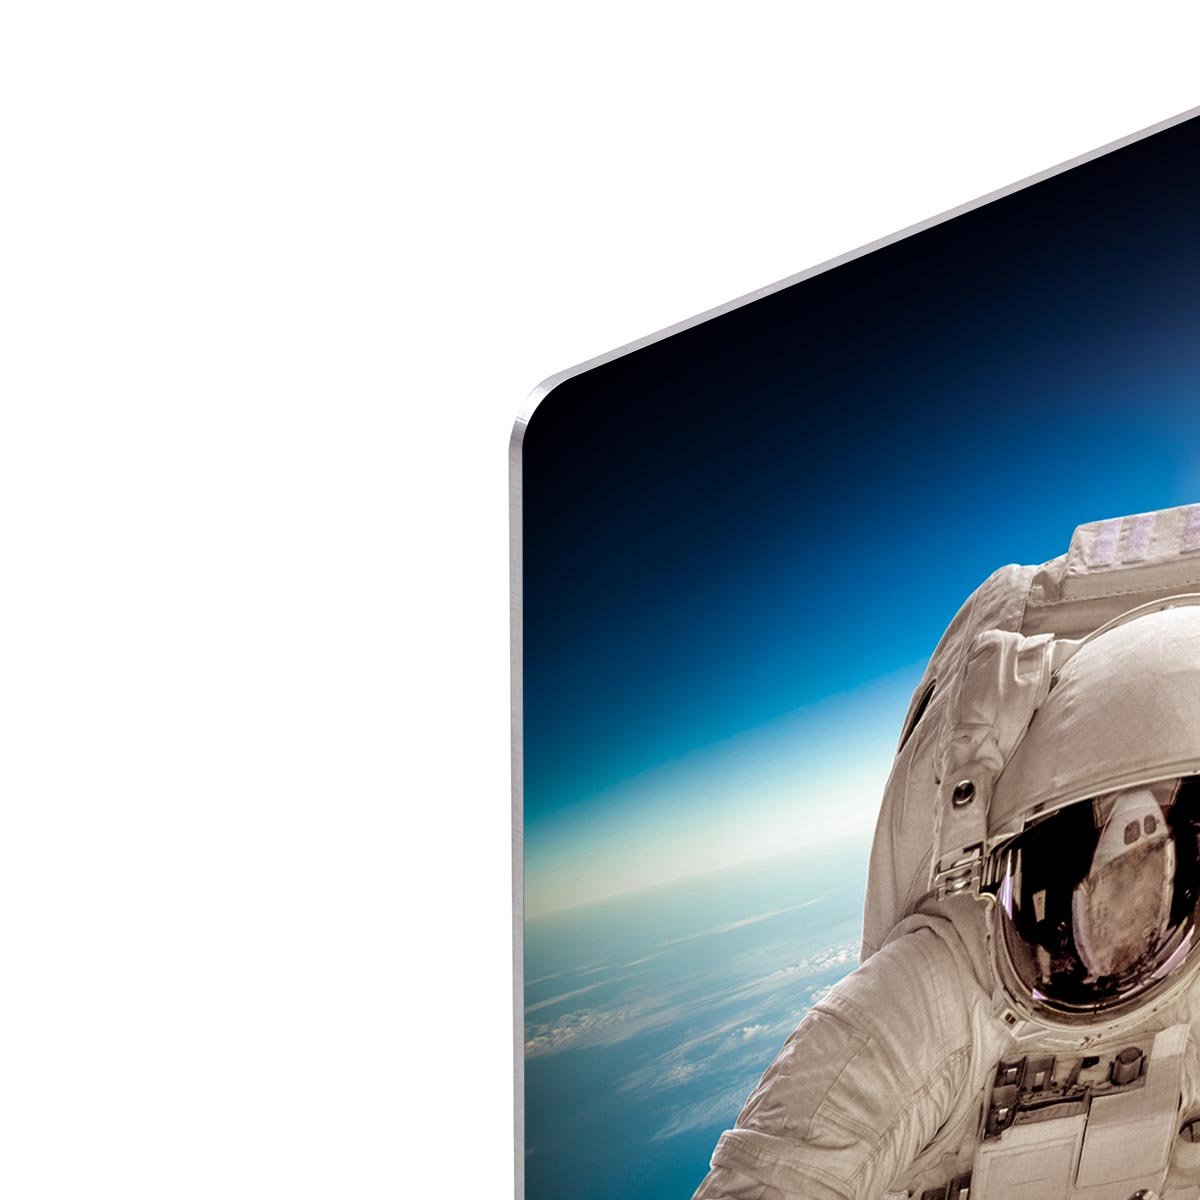 Astronaut in outer space HD Metal Print